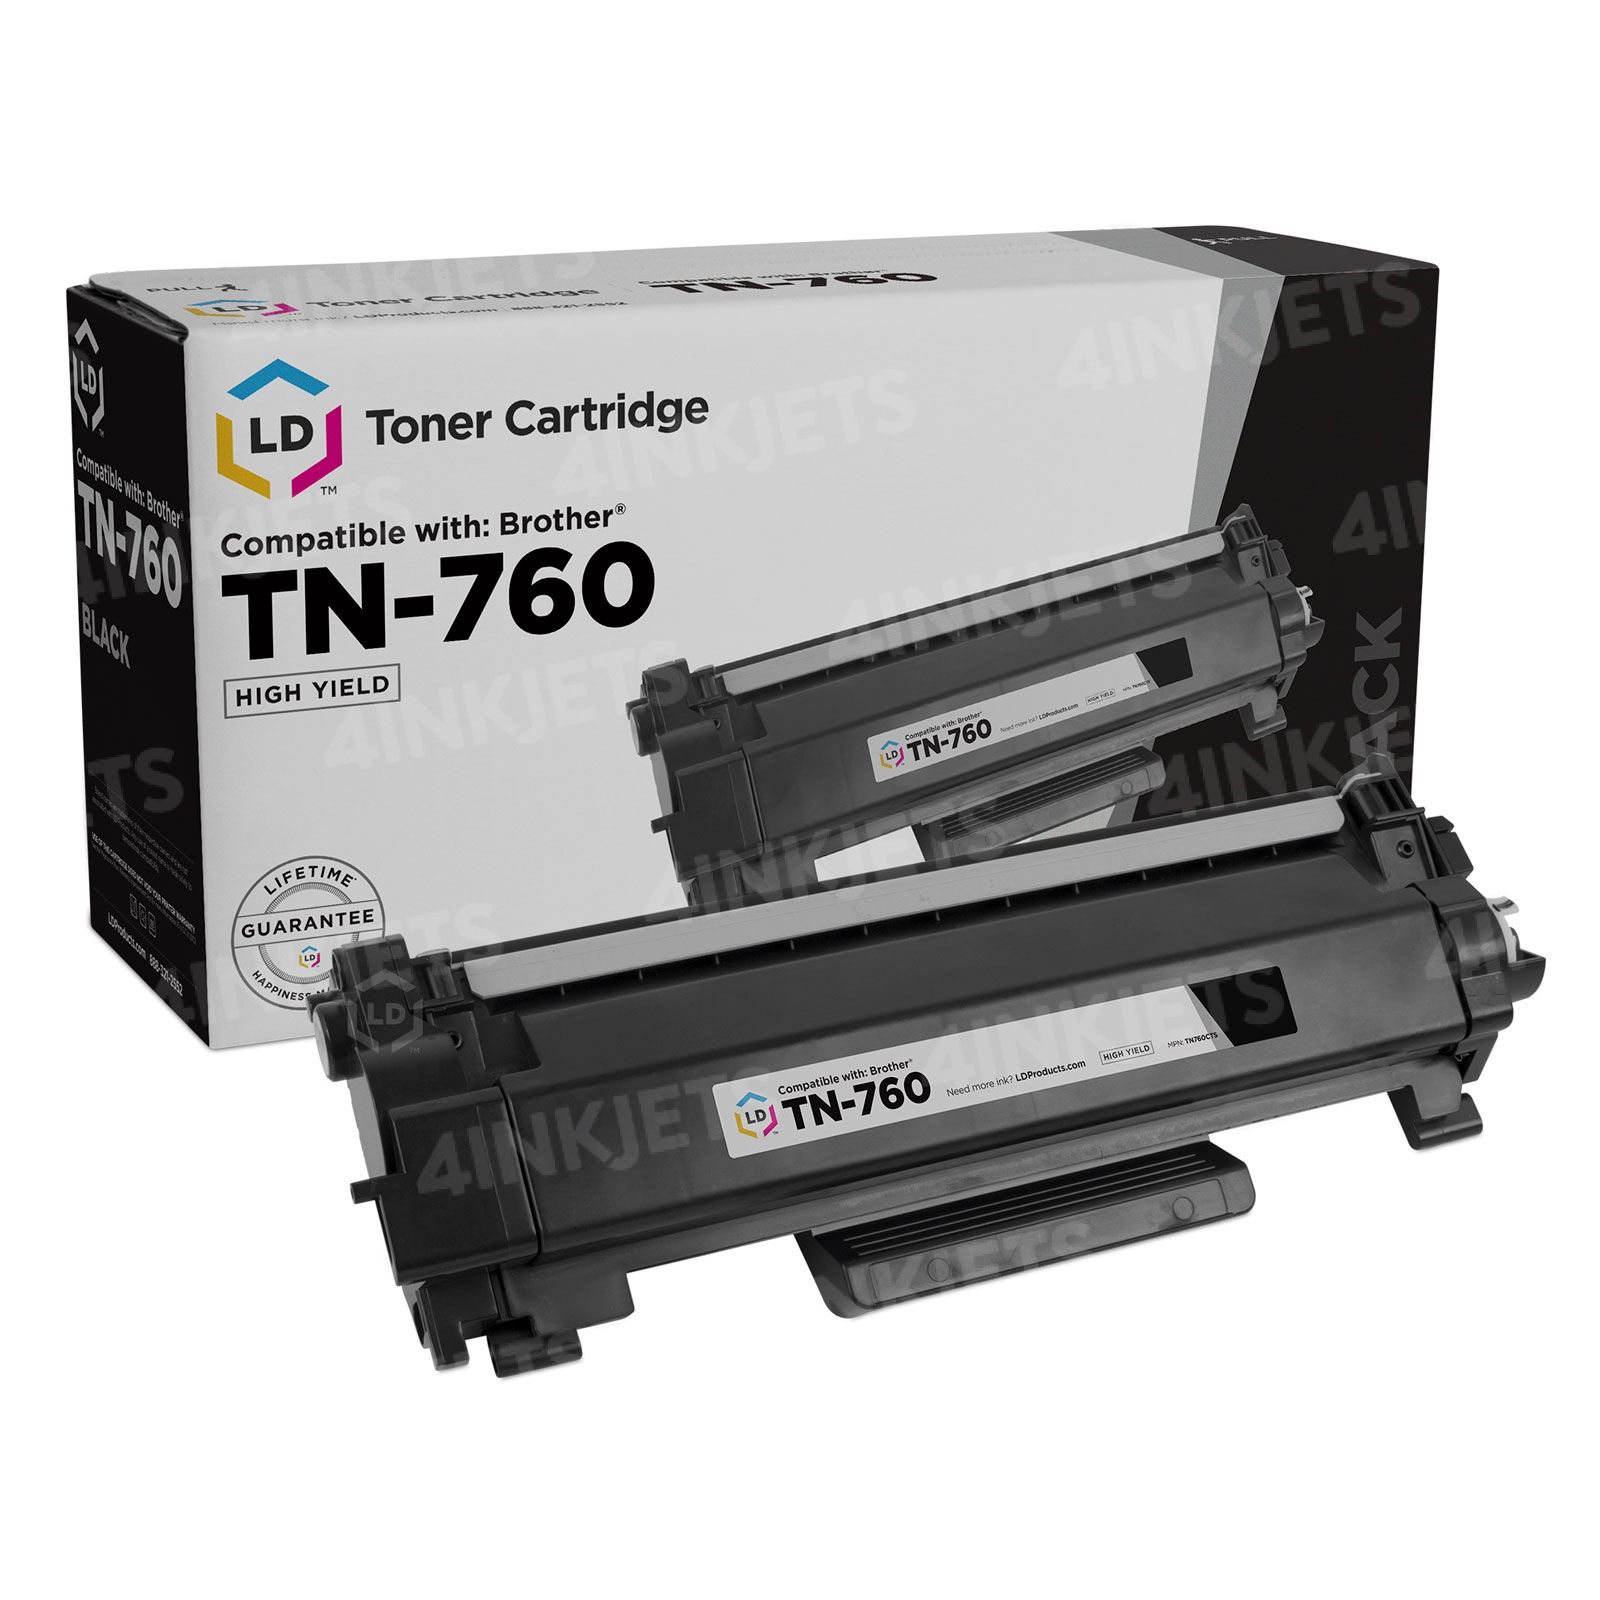 MFCL2750DW Change Toner – Brother quick fix 